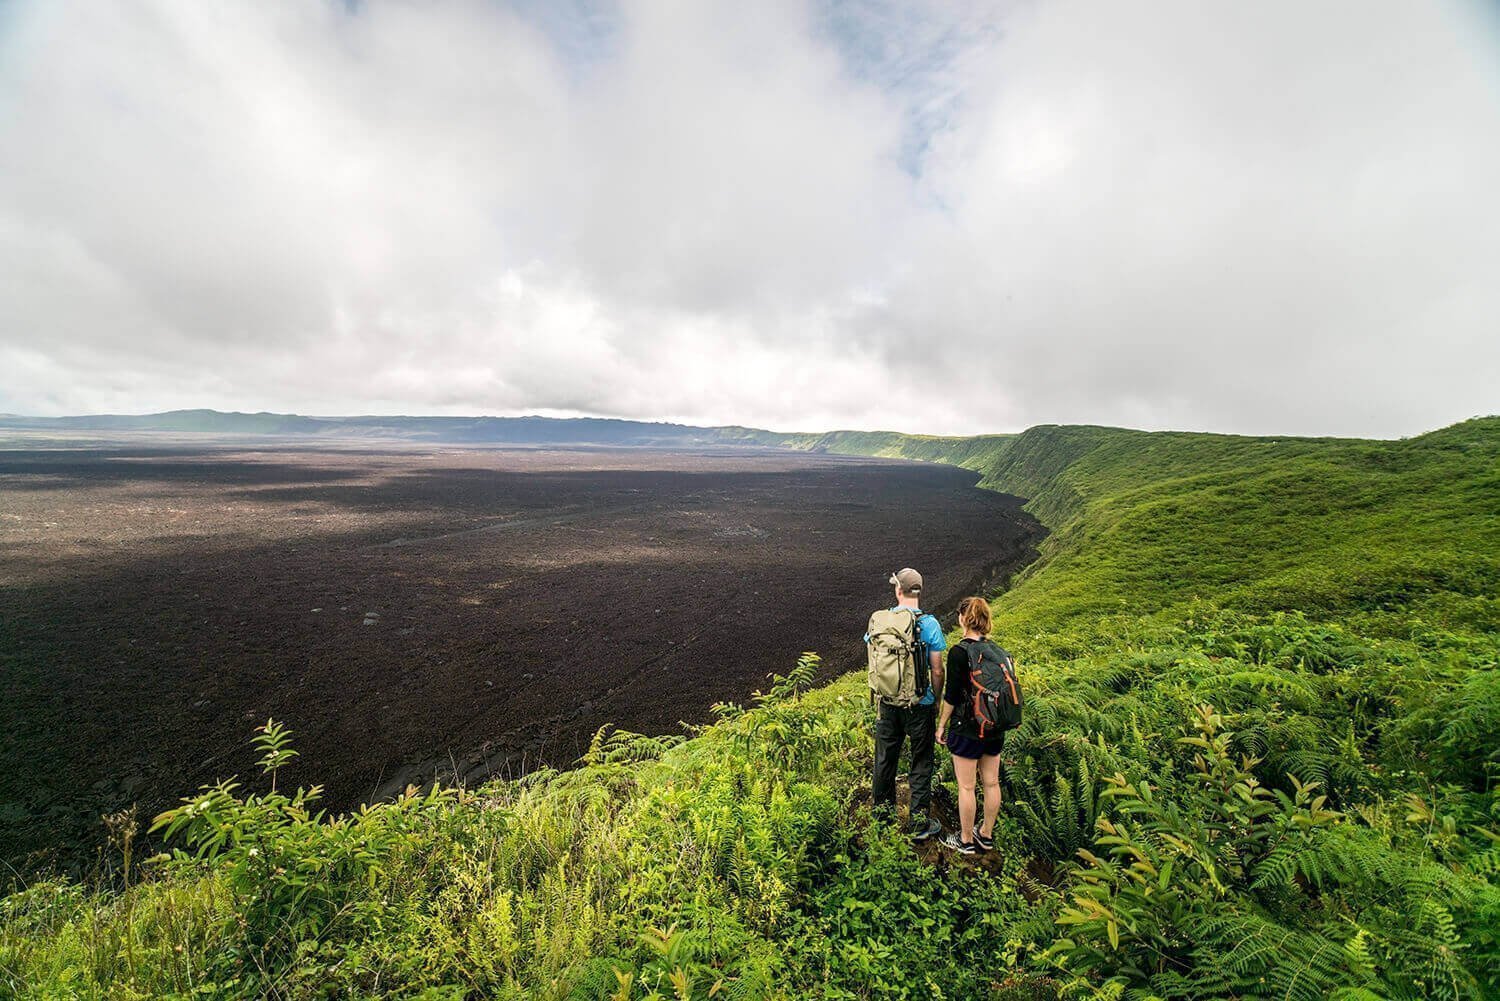 Things to do in Galapagos - Hiking and trekking